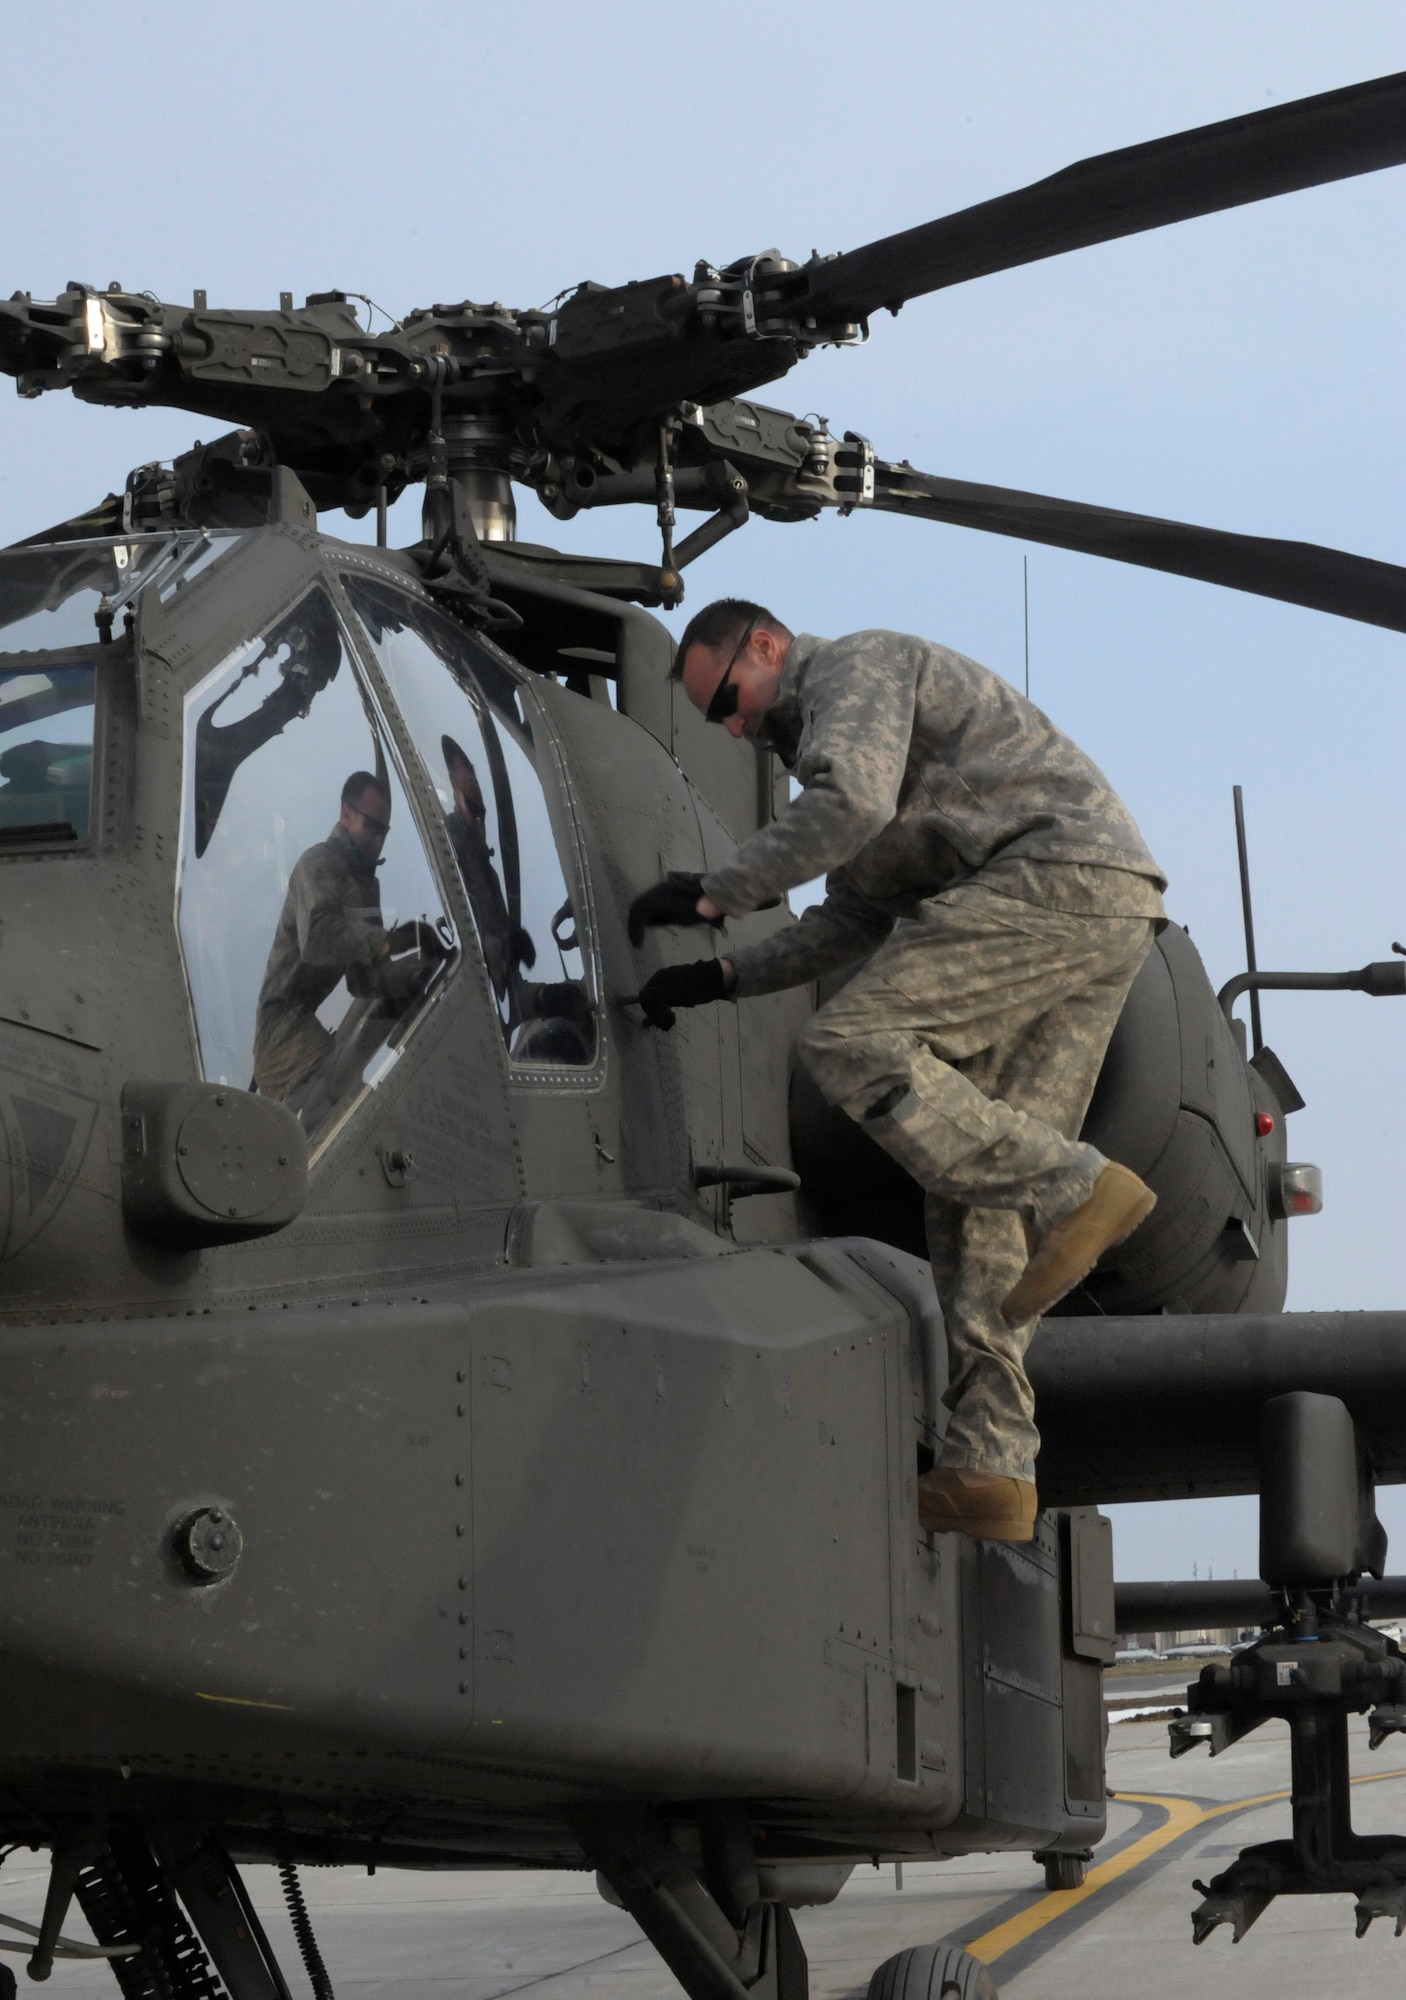 A U.S. Army AH-64 Apache Longbow crew chief from the 1-135th Attack Reconnaissance Battalion at Whiteman Air Force Base, Mo., readies his aircraft March 27, 2013, for its deployment to Afghanistan. The 1-135th ARB prepared for this deployment with 30 days of training in Boise, Idaho. (U.S. Air Force photo by Airman 1st Class Shelby R. Orozco/Released)